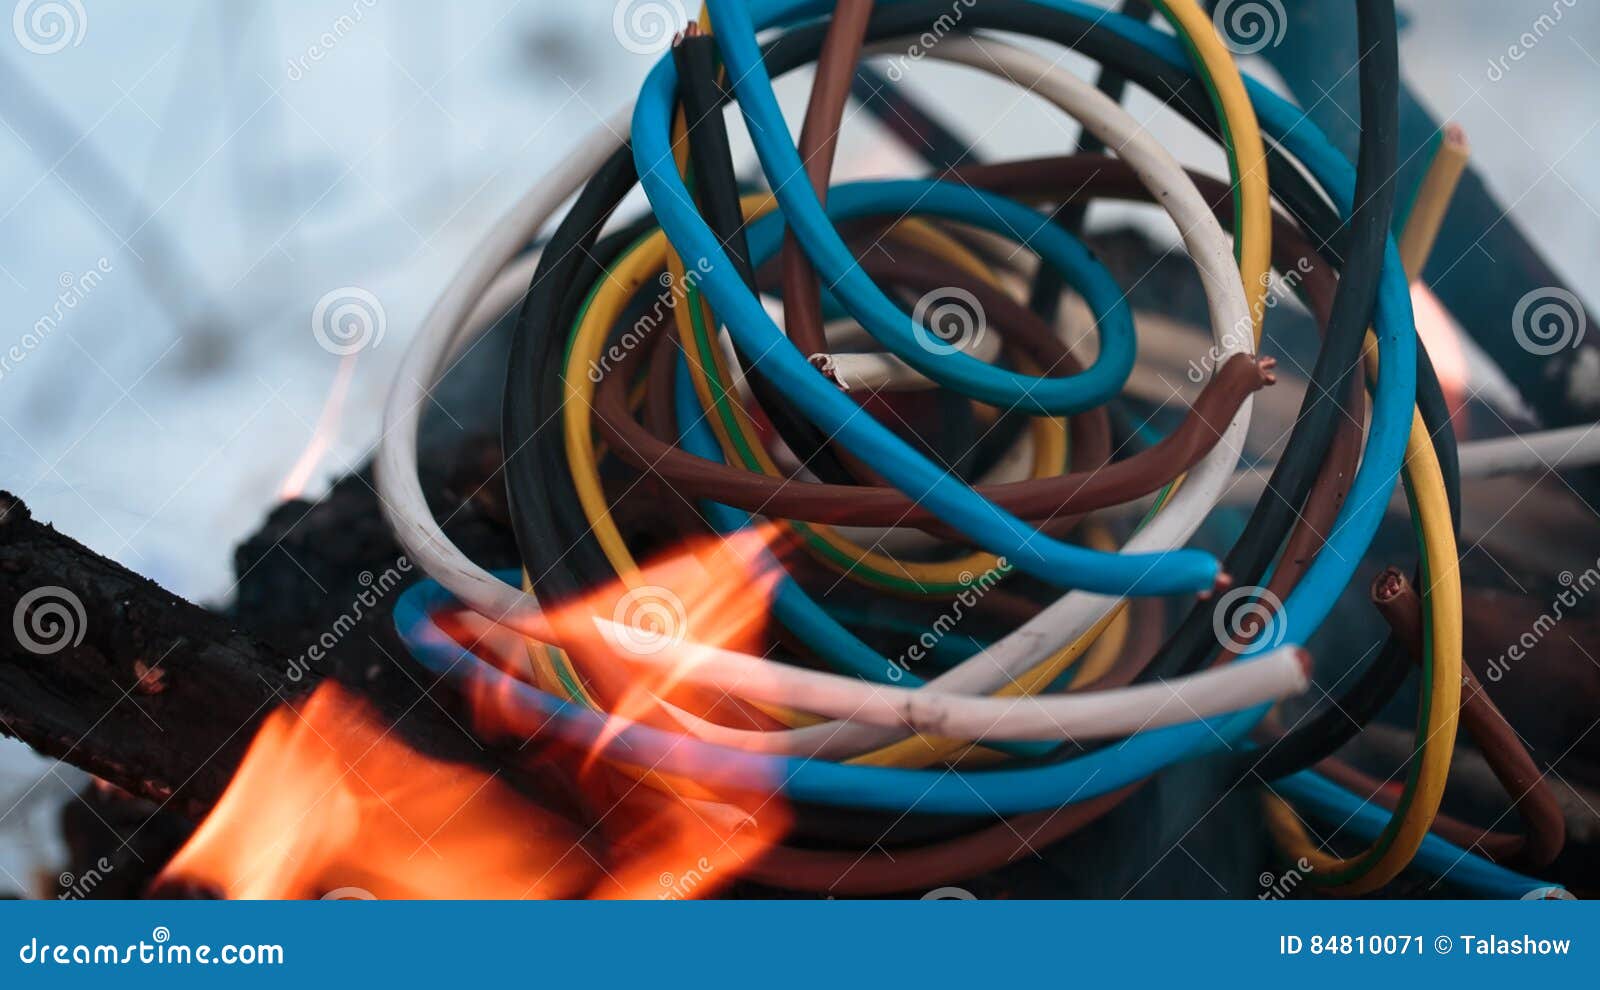 Firing wire in fire stock image. Image of electrical - 84810071